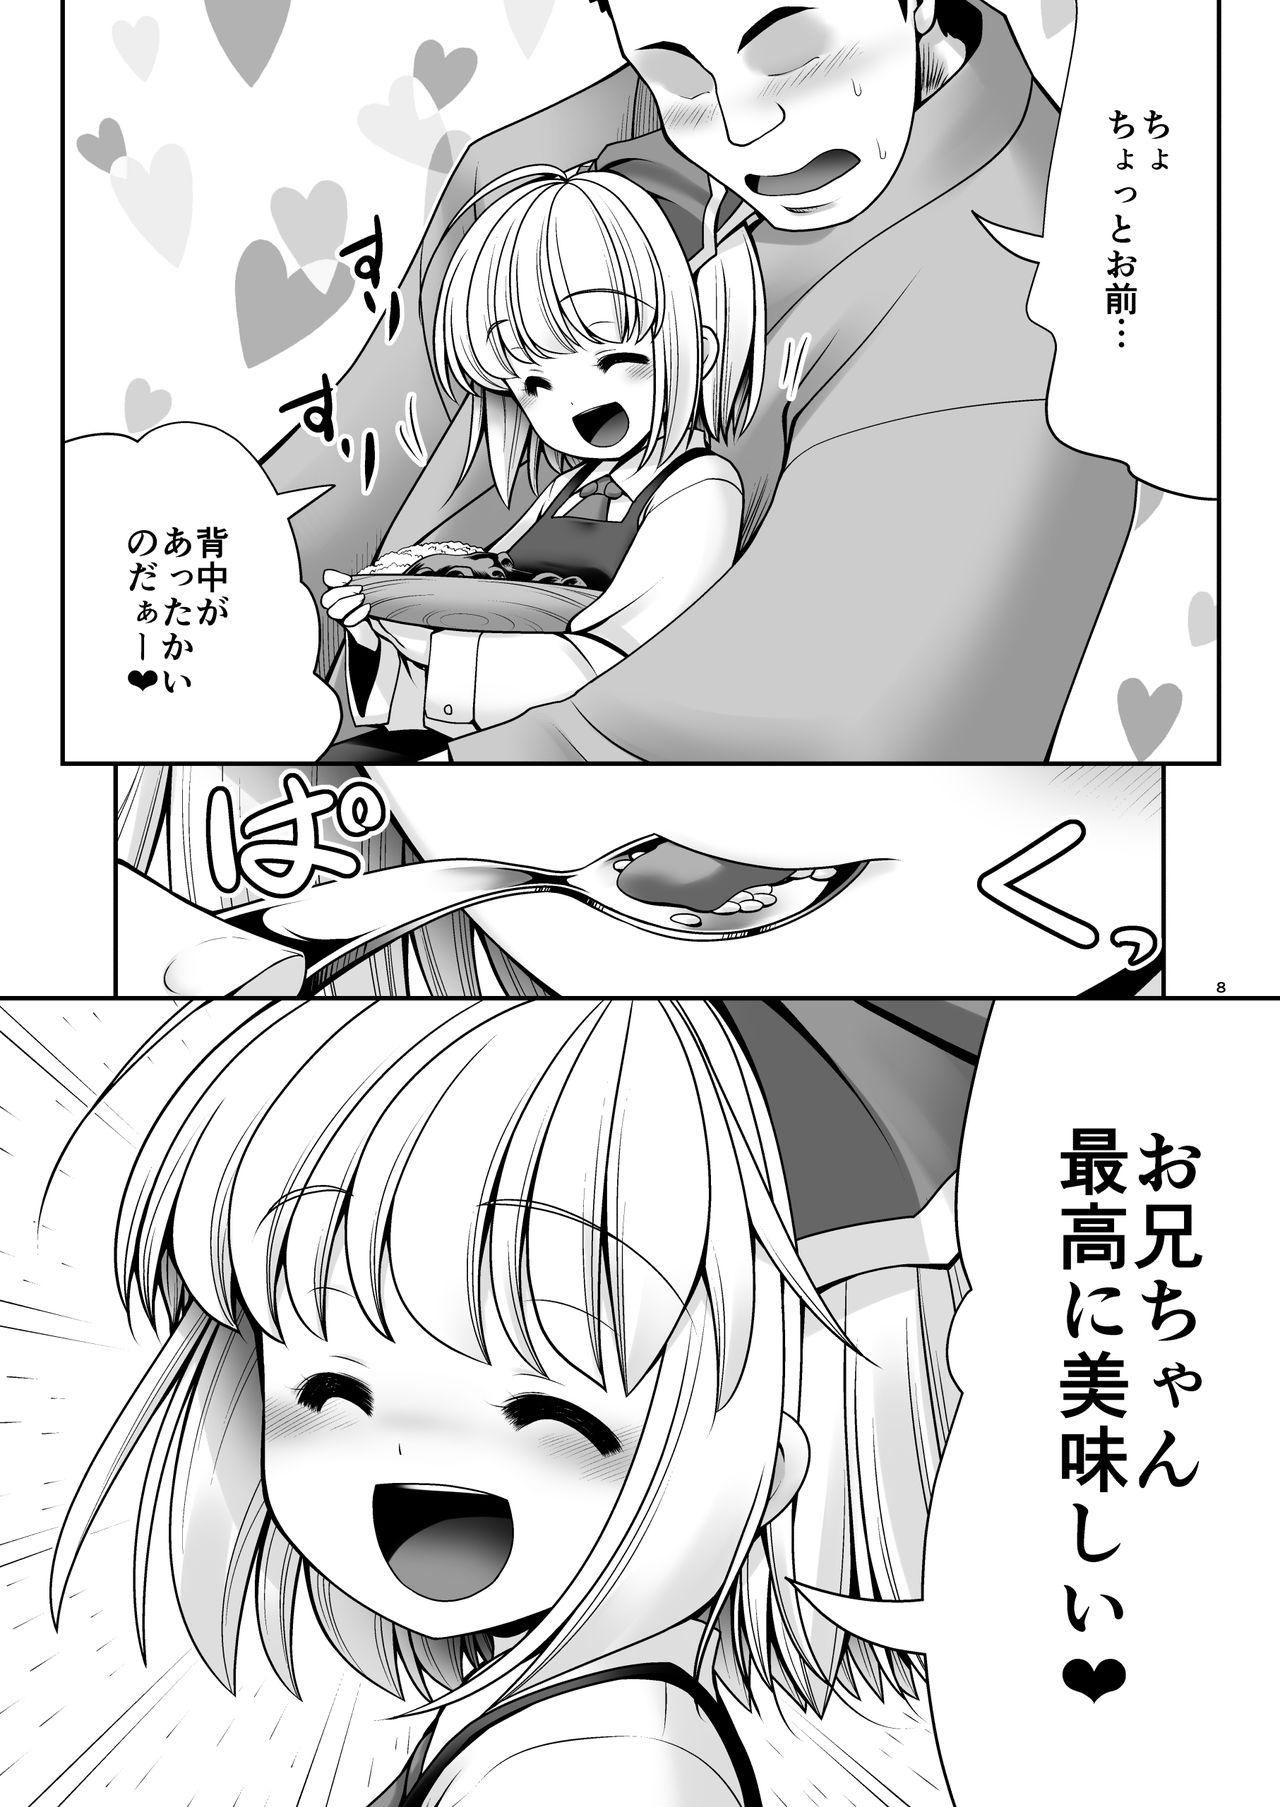 Handsome "Okaeshi" - Touhou project Oral - Page 8